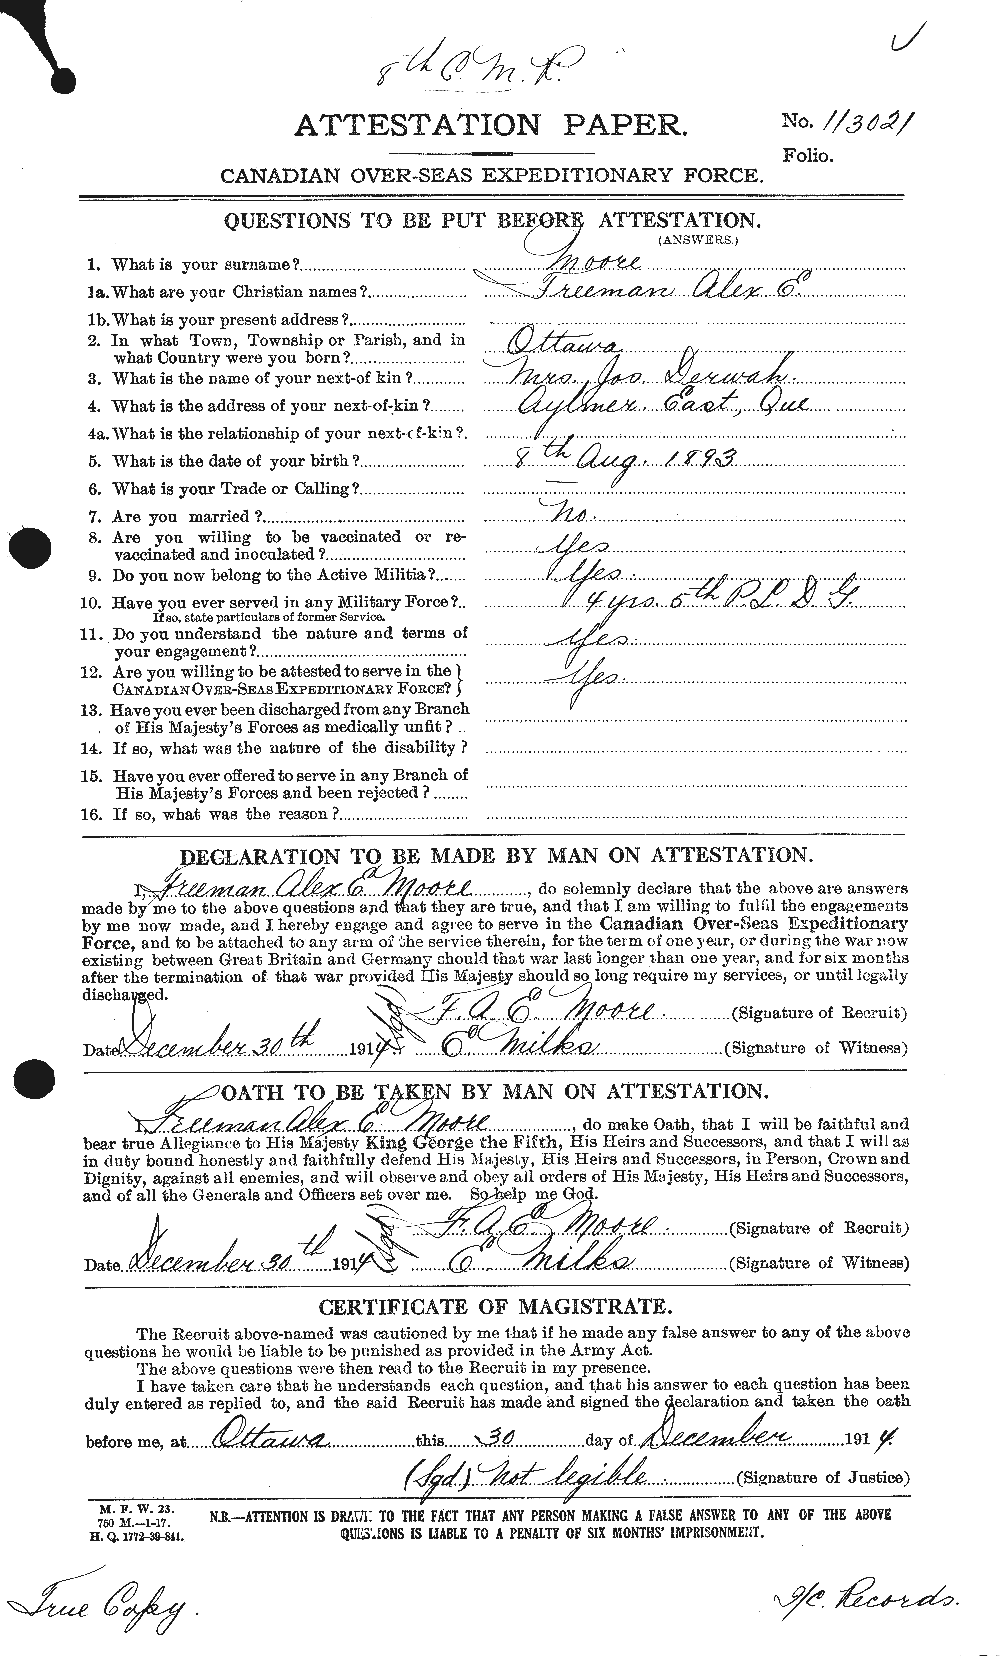 Personnel Records of the First World War - CEF 506764a